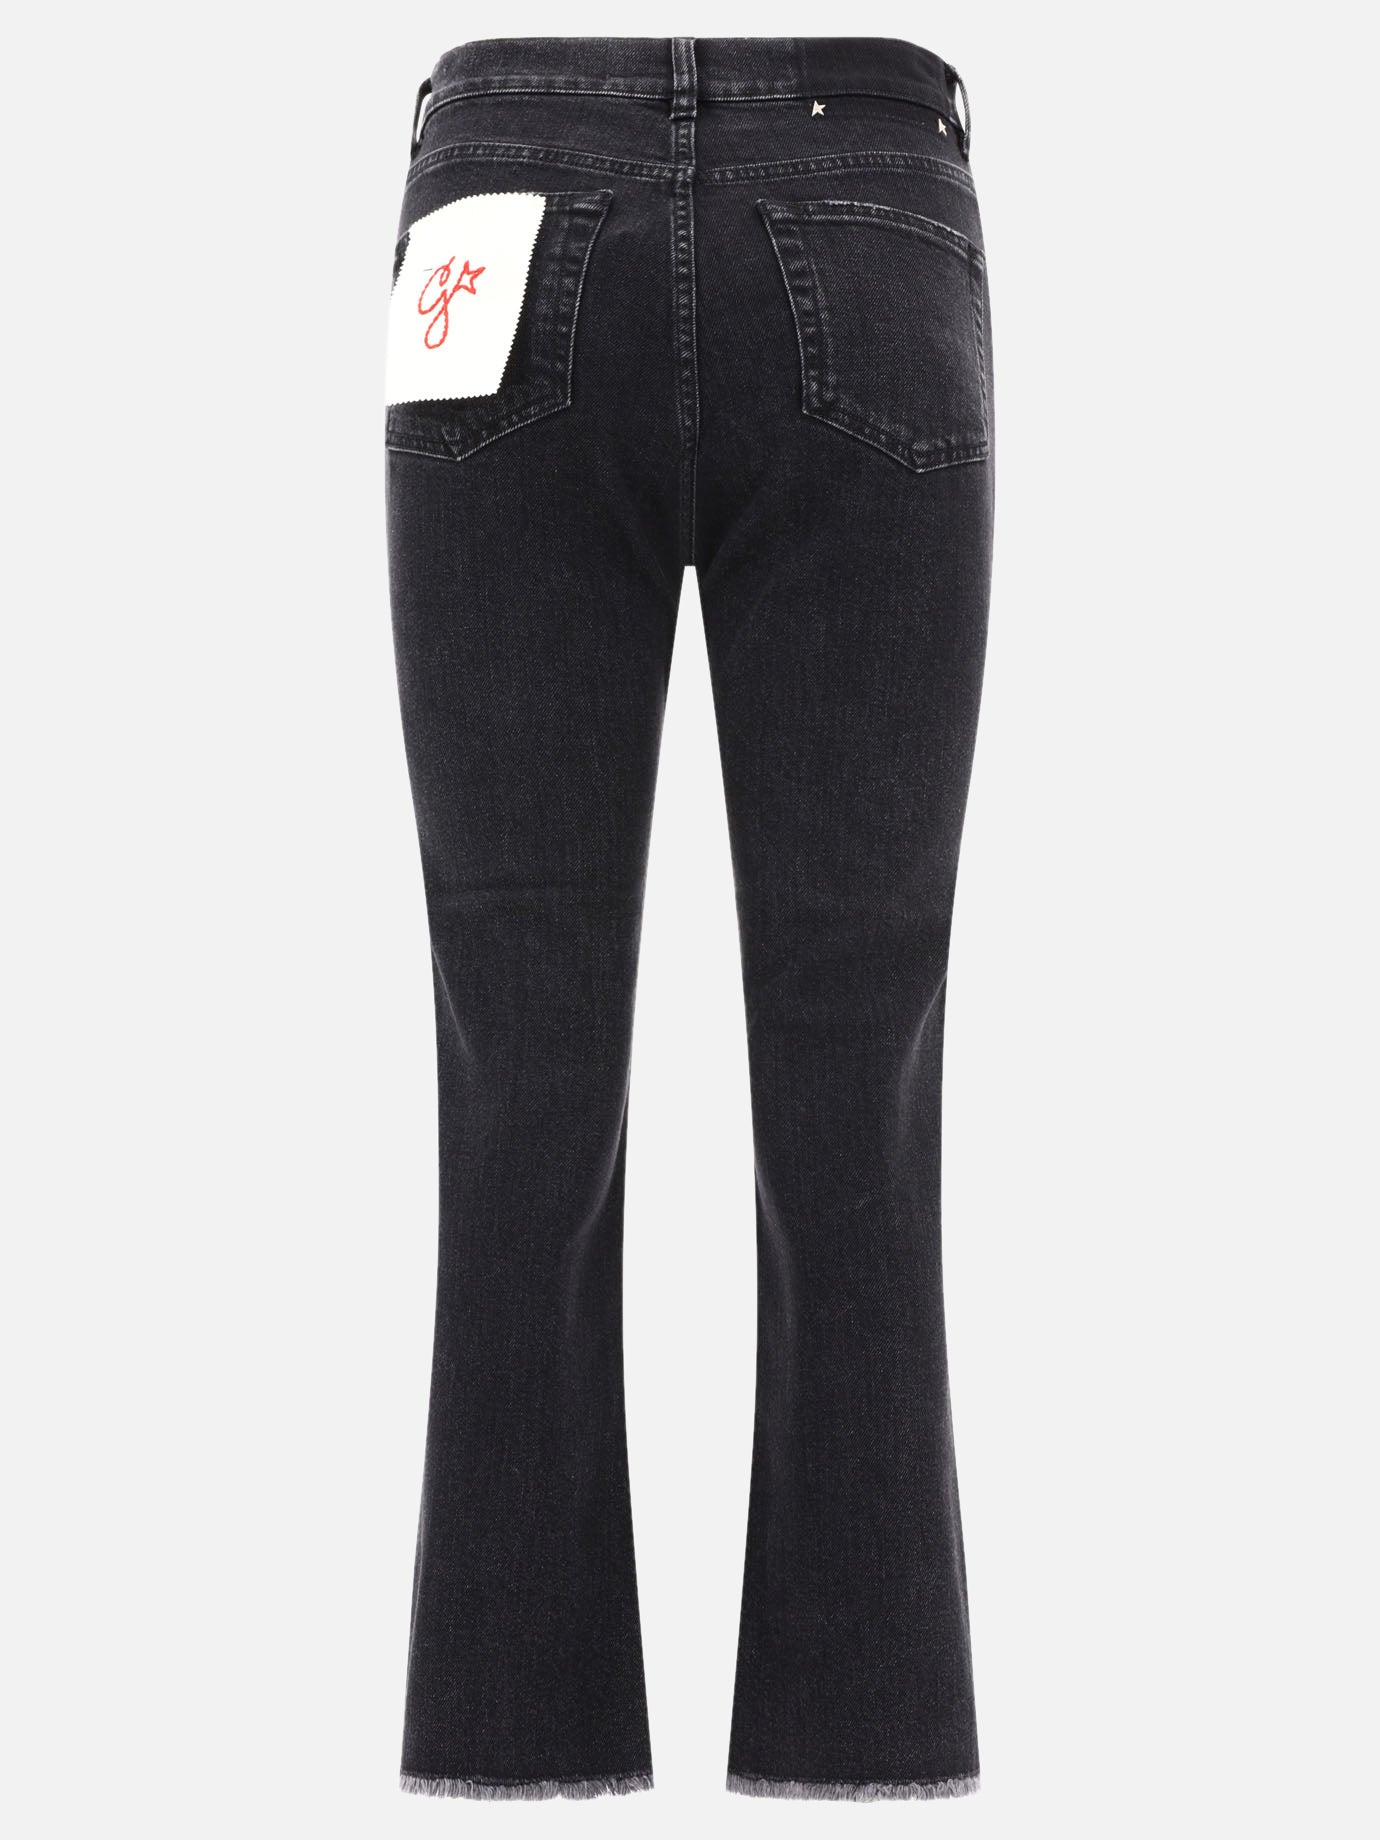 "New Cropped Flare" jeans